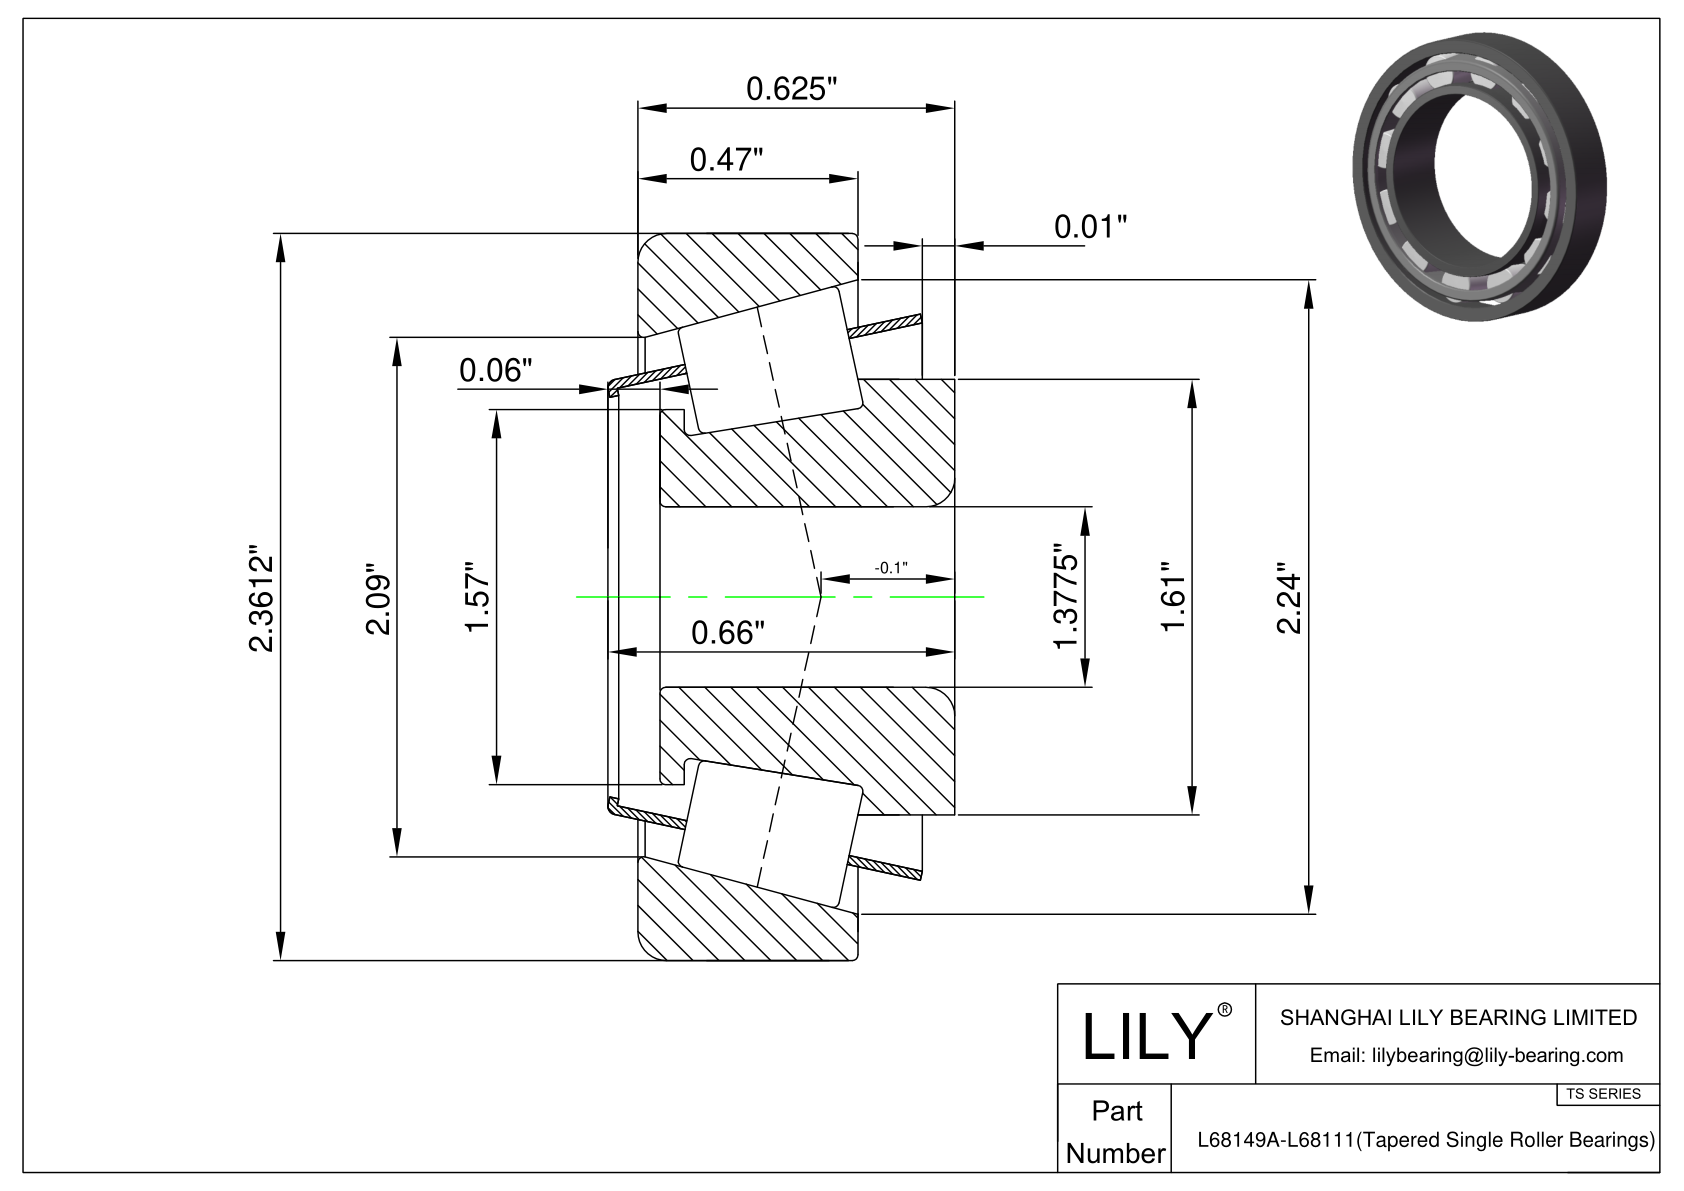 L68149A-L68111 TS (Tapered Single Roller Bearings) (Imperial) cad drawing